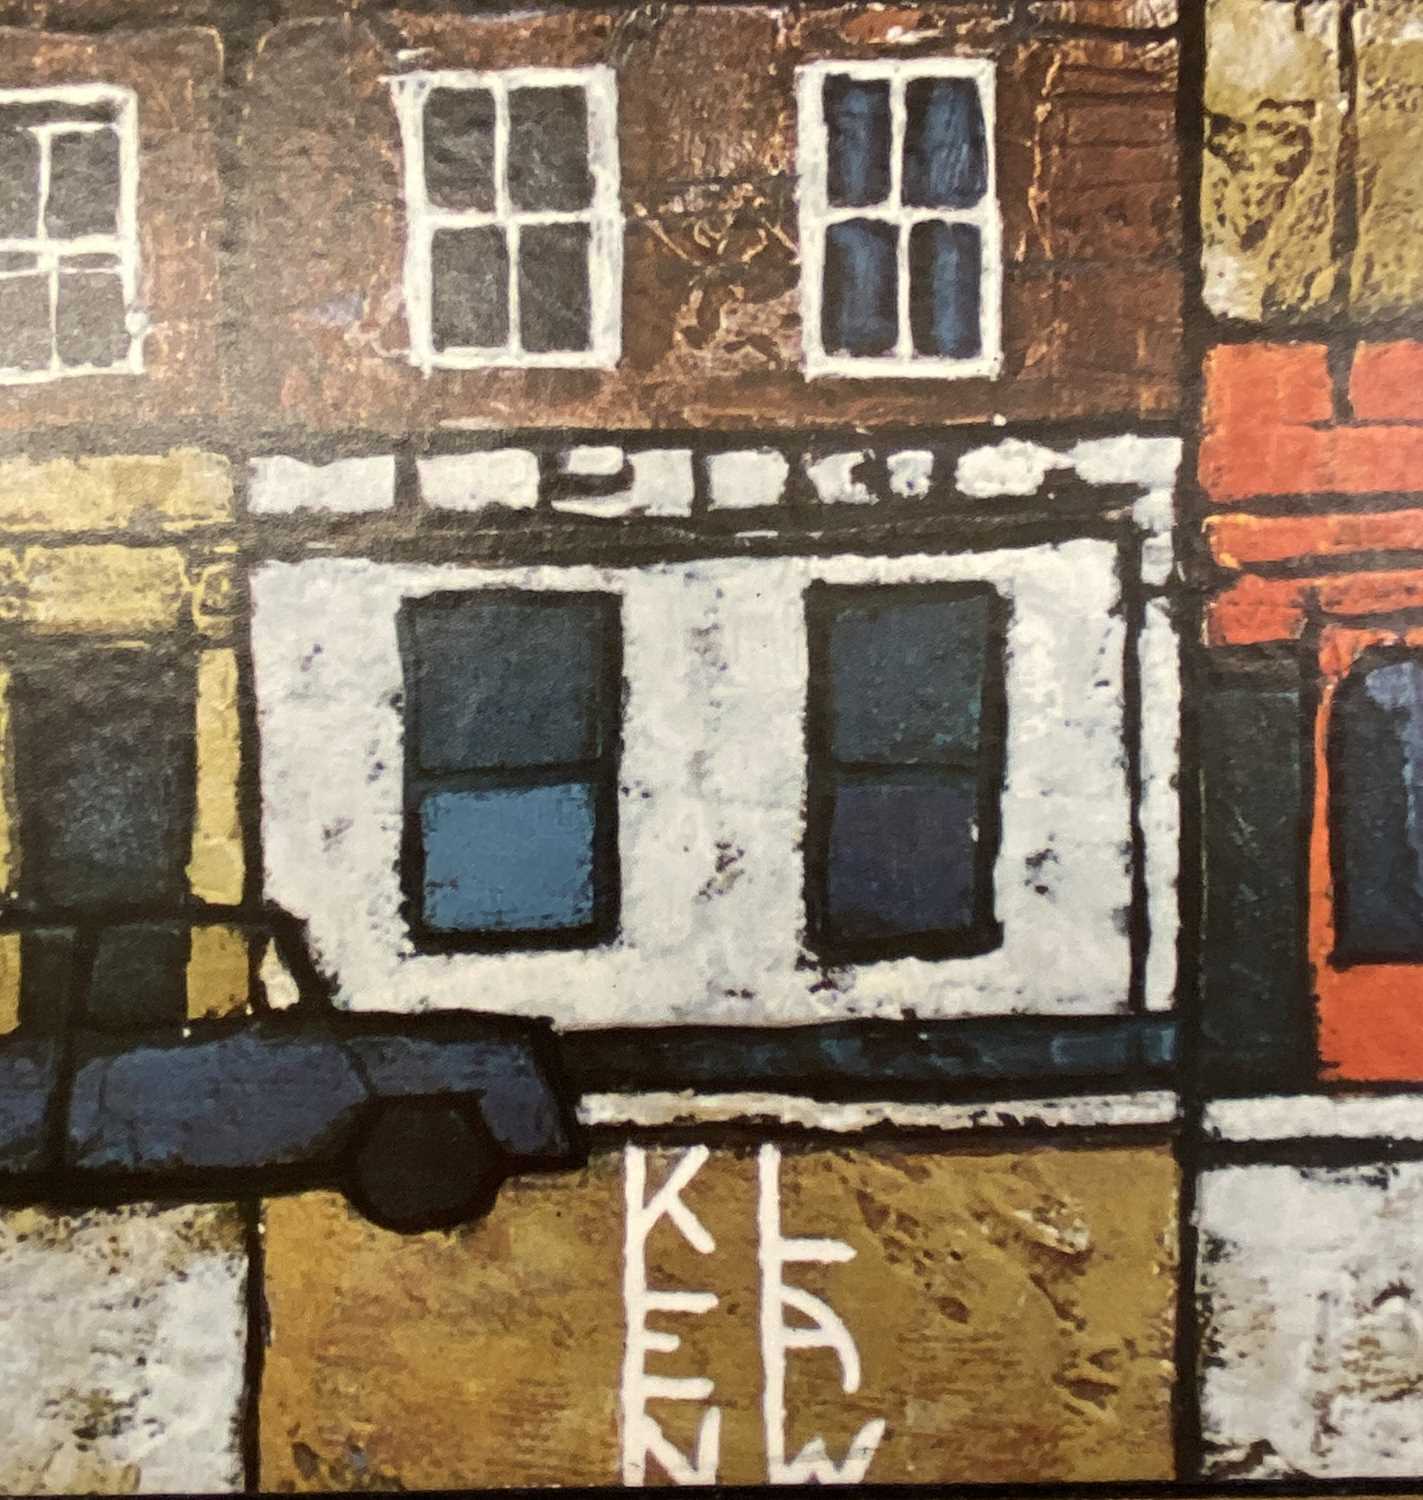 KEN LAW print on board - an abstract urban scene, 28 x 110cms - Image 3 of 3